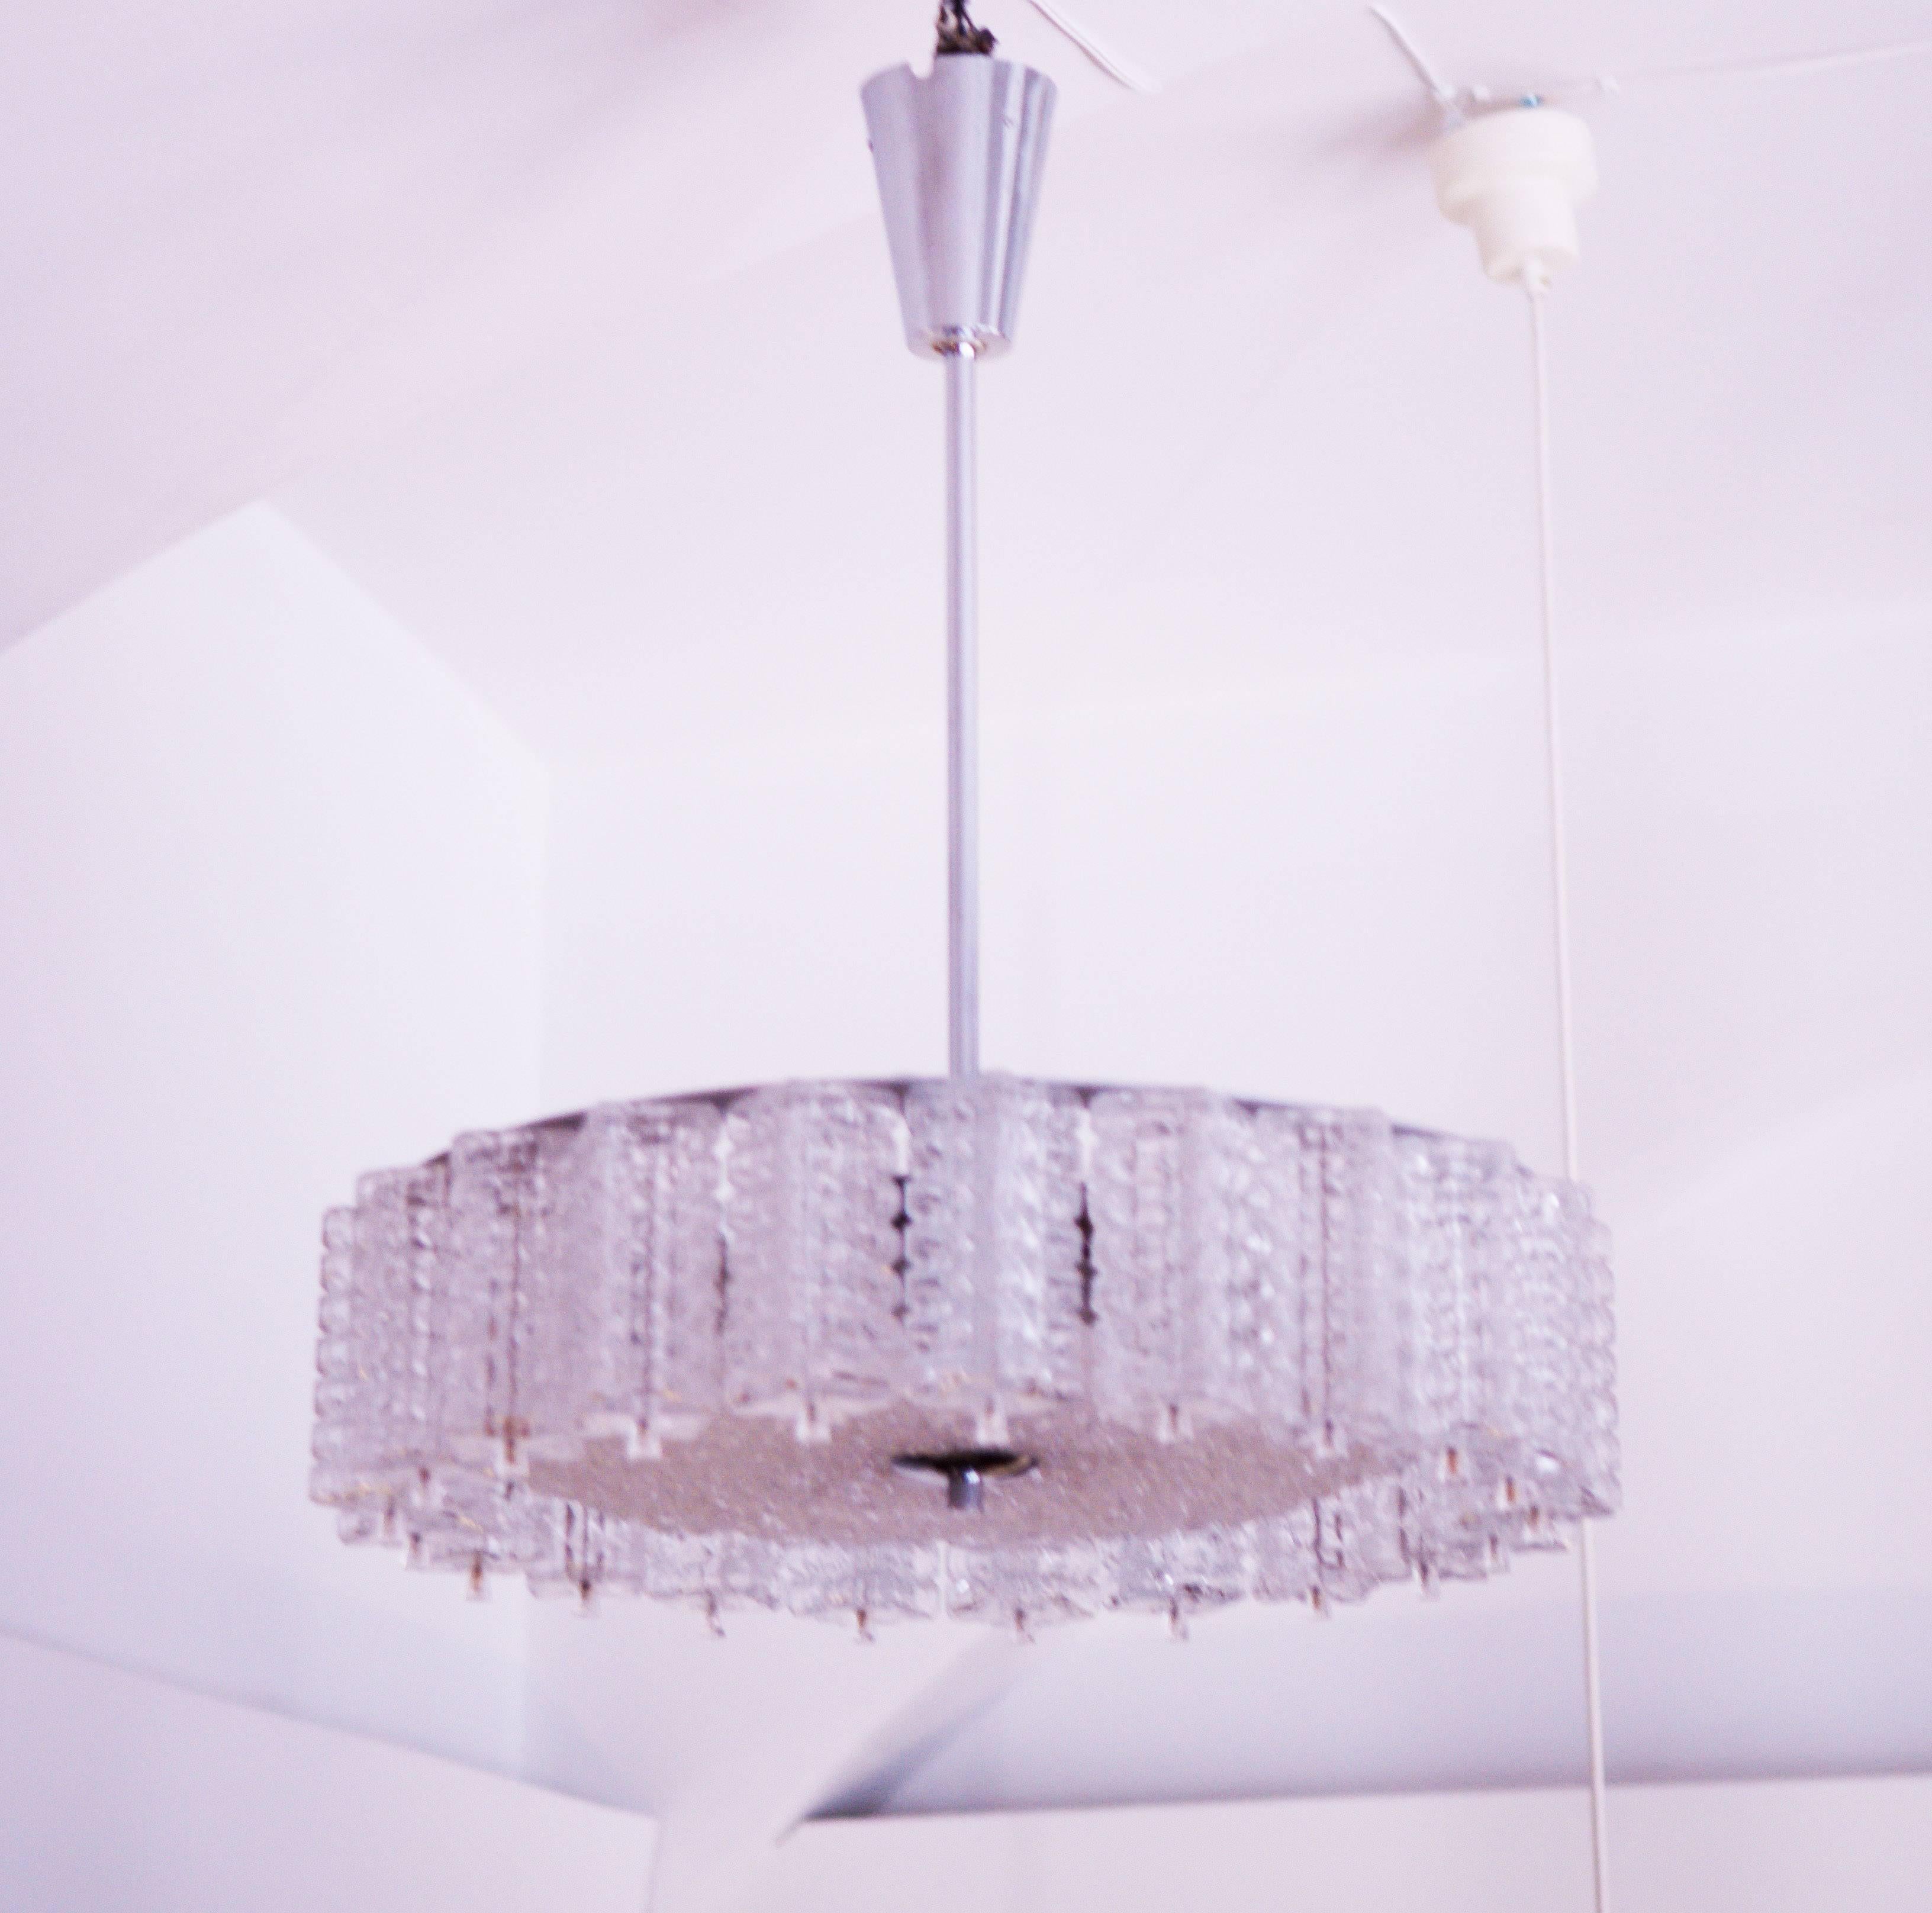 Austrolux glass chandelier From 1960's.
Hand blow glass plate, pressed glass elements.